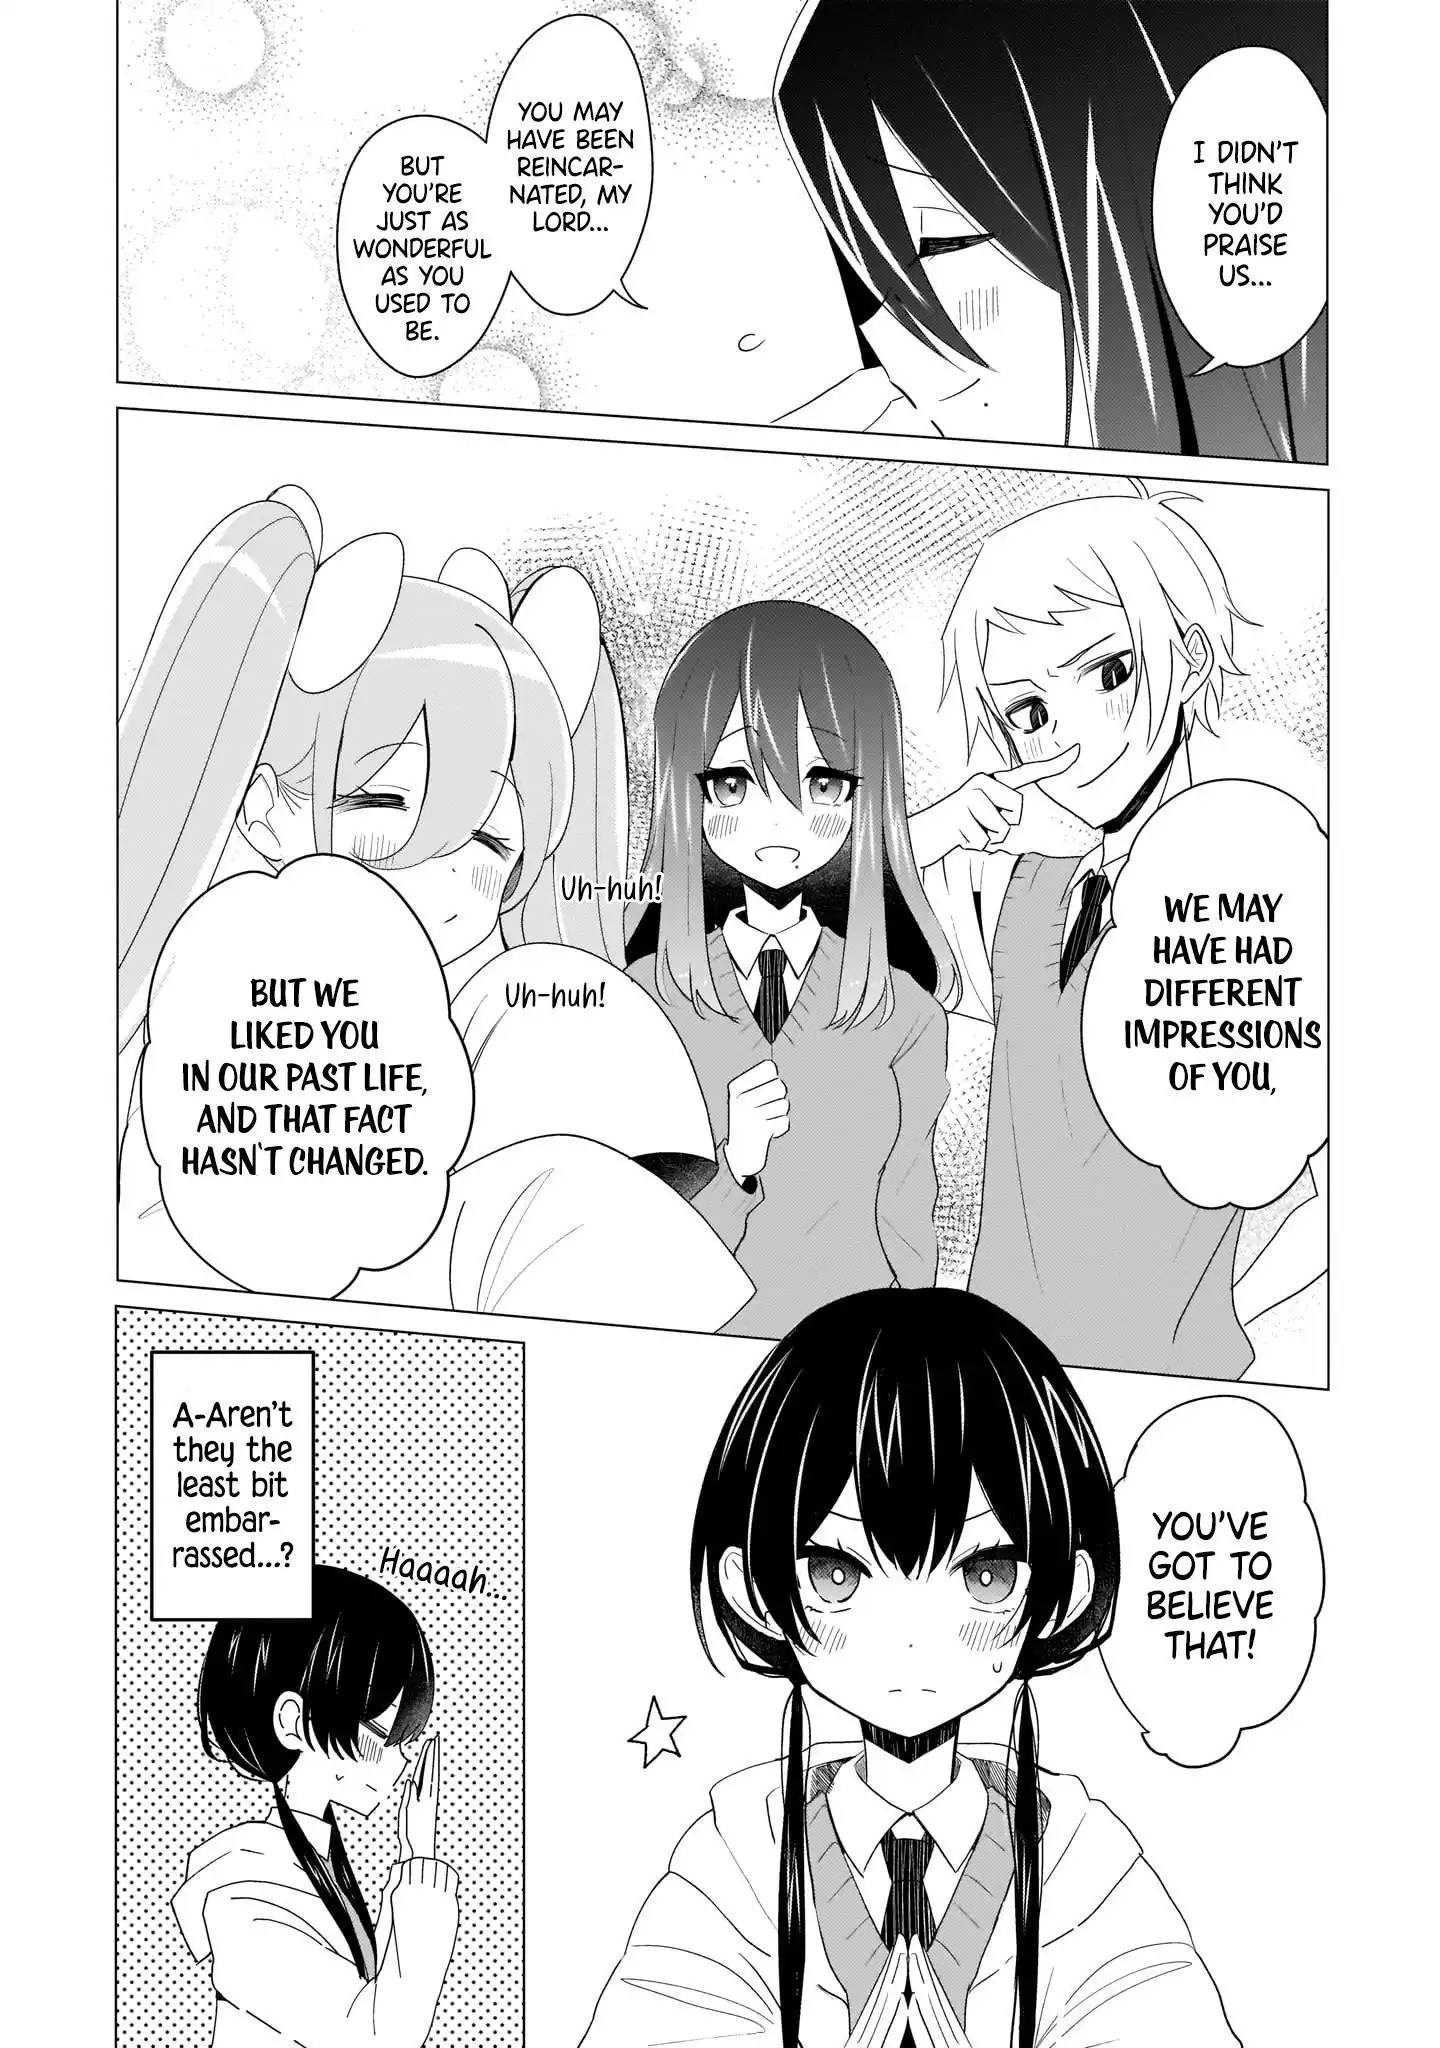 The Demon Lord's Love Life Isn't Going Well Chapter 3